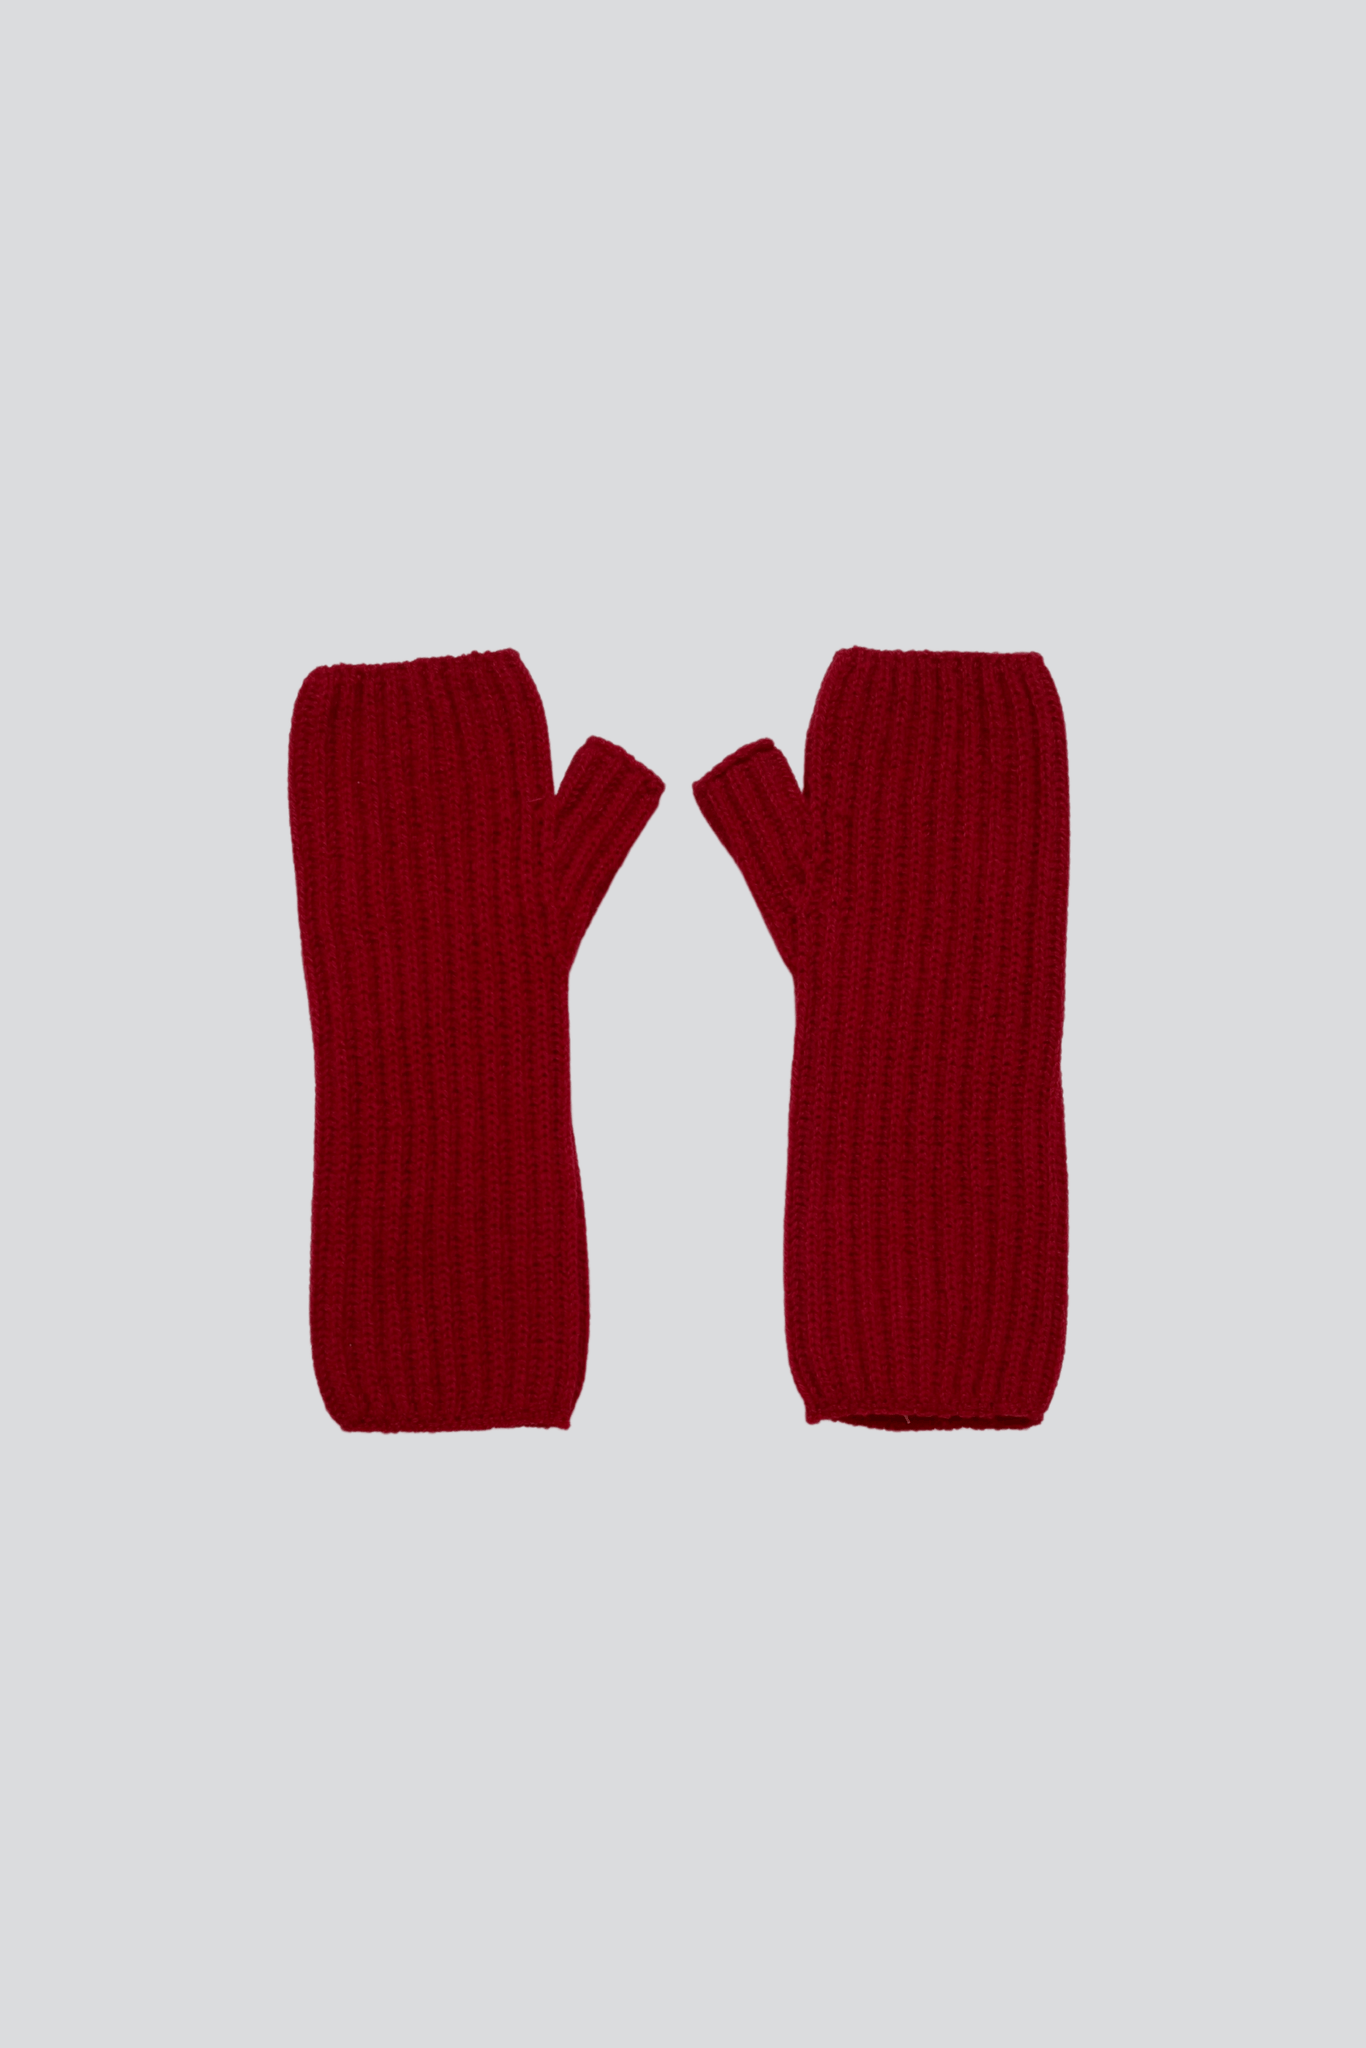 Luxury Ribbed Red Cashmere Wristwarmers by Lavender Hill Clothing